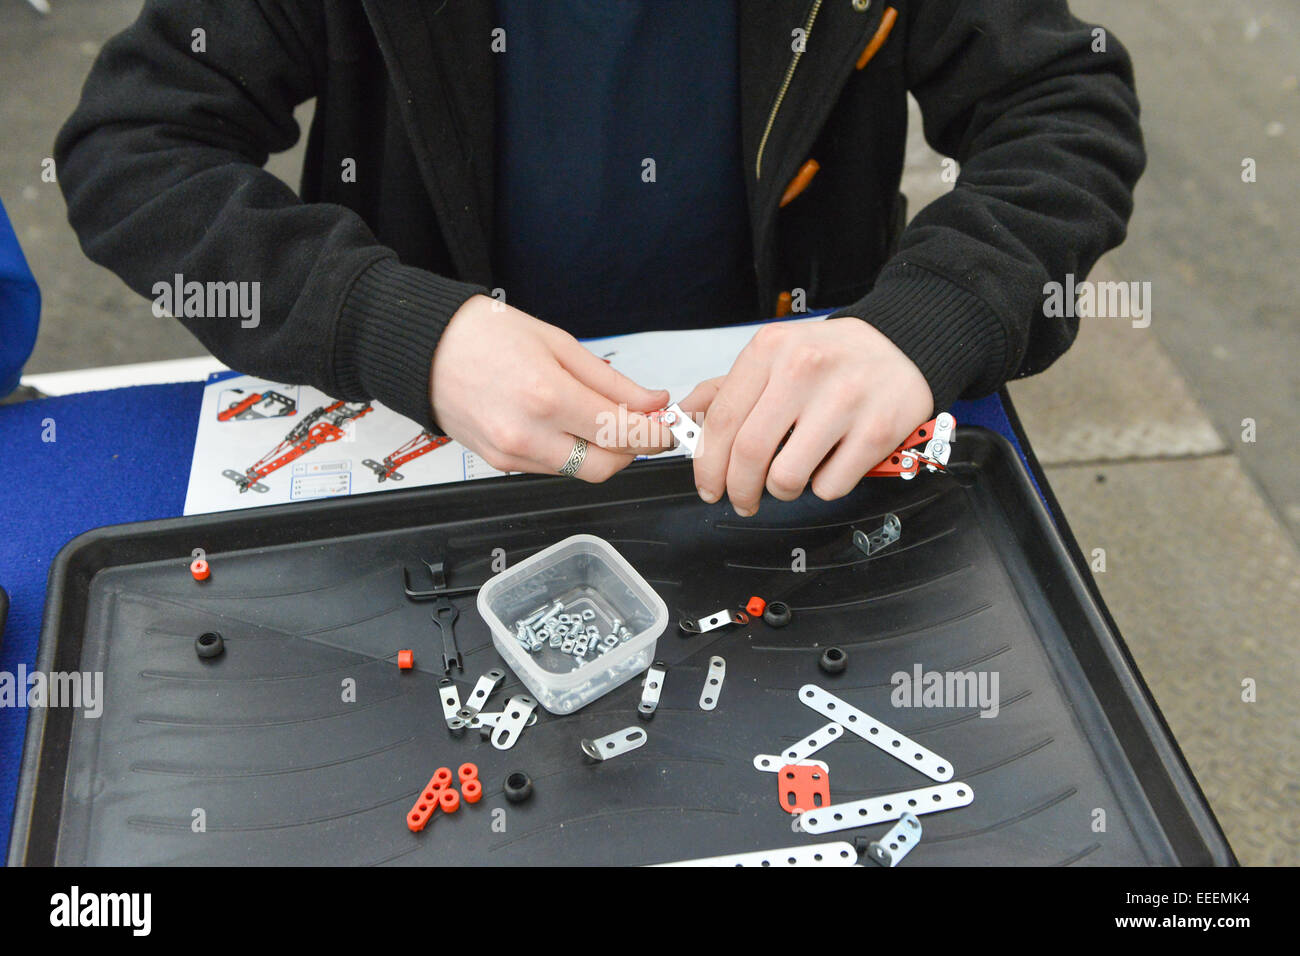 Alexandra Palace, London, UK. 16th January 2015. Making Meccano models, of the many types of models on display. The  London Model Engineering Exhibition is at Alexandra Palace over the weekend. Credit:  Matthew Chattle/Alamy Live News Stock Photo